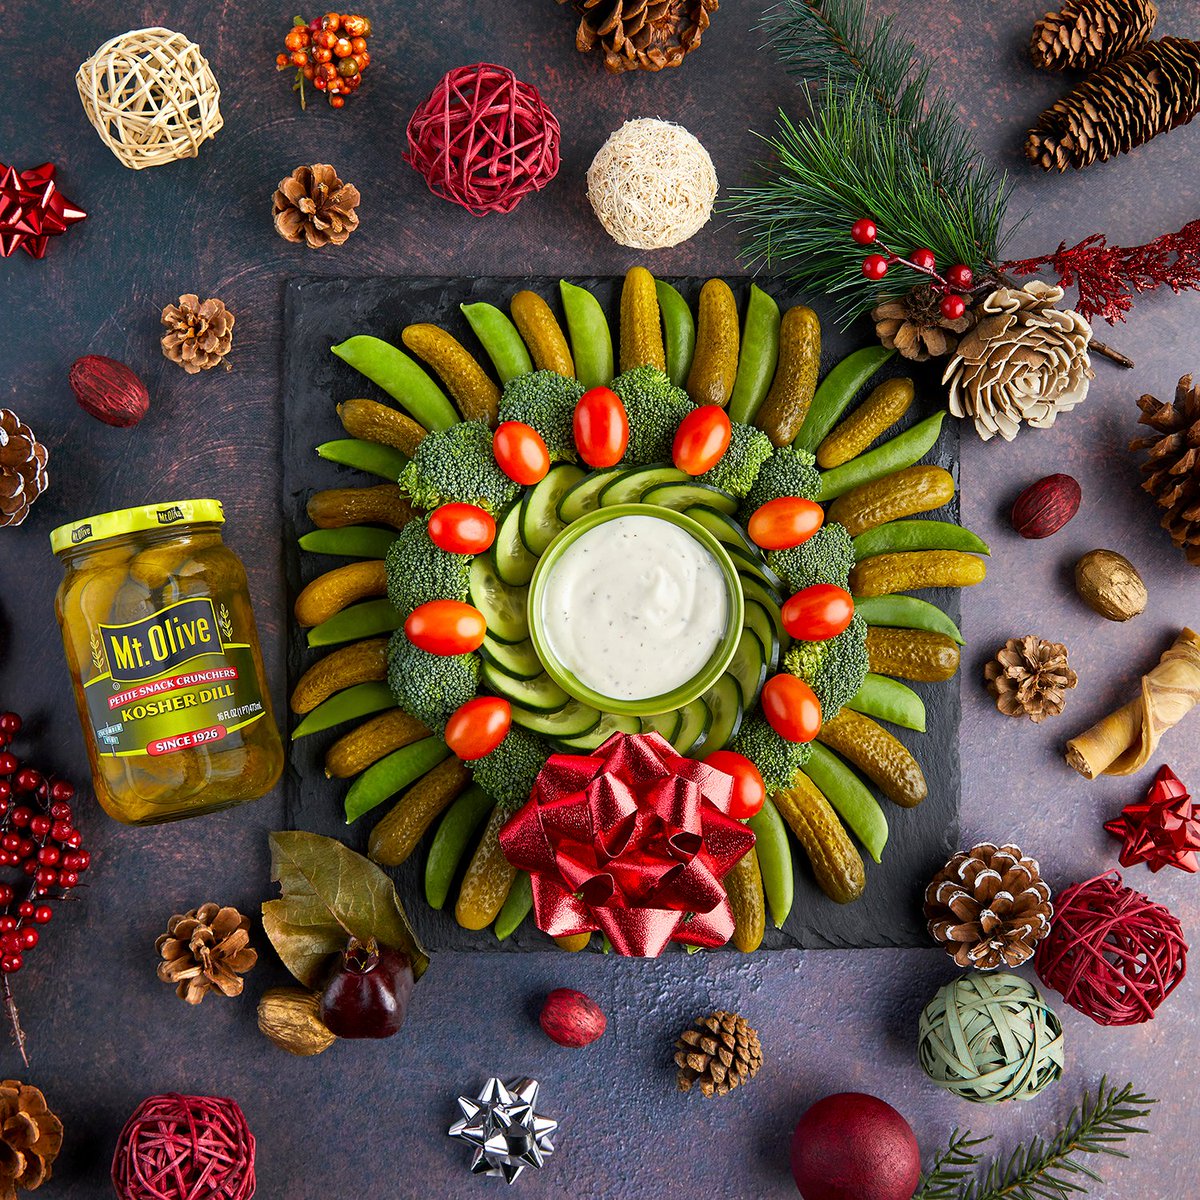 🥒 Arrange your favorite veggies & Mt. Olive Pickles to create a wreath! 🎄 It’s easy to make and fun to eat!

#Pickles #VeggieTray #RelishTray #PickleLover #MtOlivePickles #FestiveAppetizer #HolidayAppetizer #MtOlivePickleCo #Appetizer #Foodie